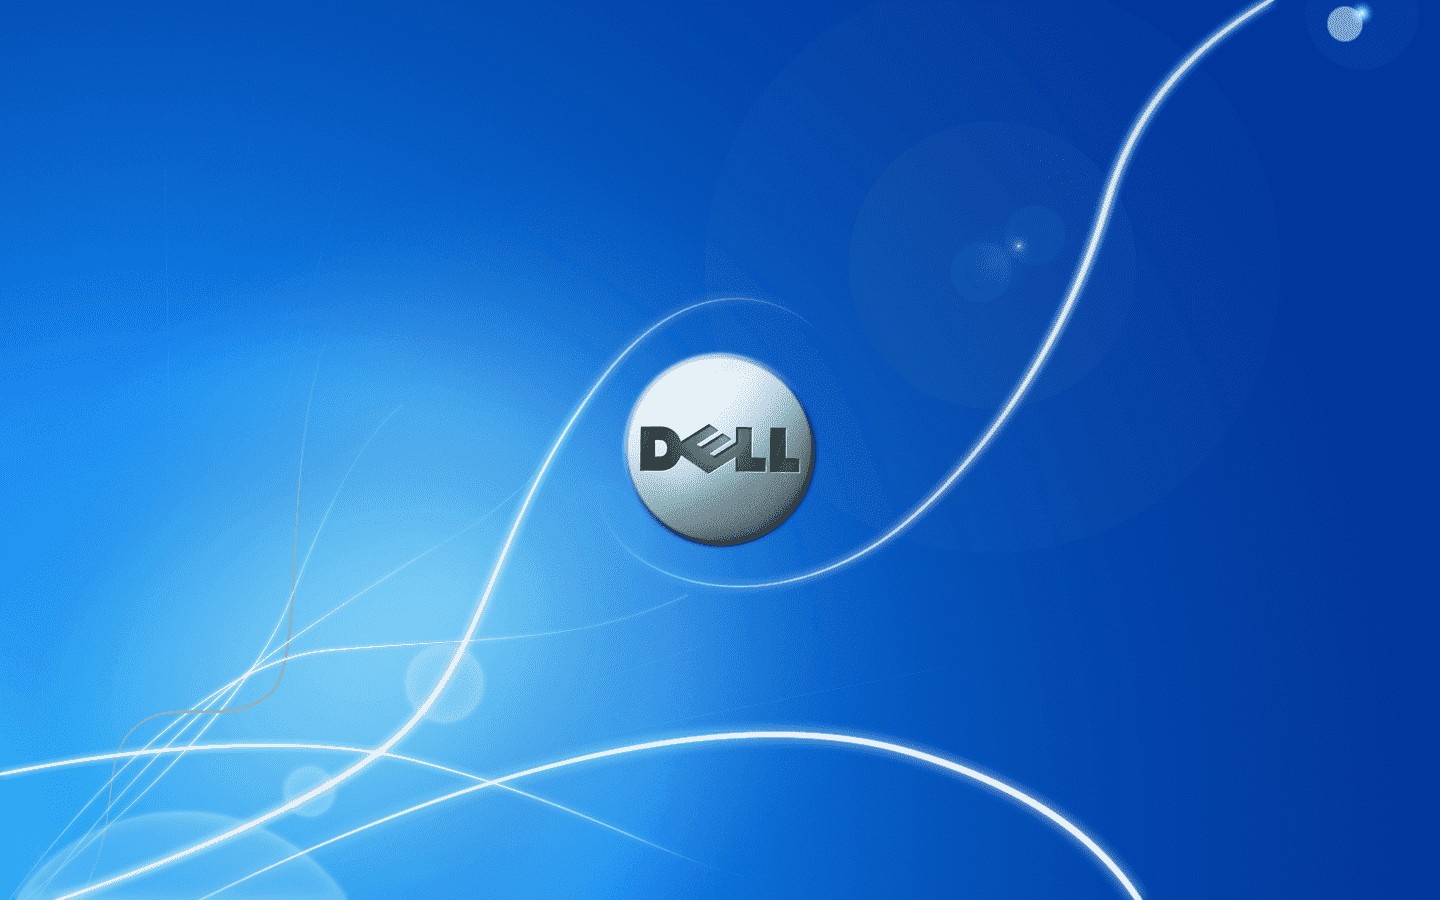 hd dell backgrounds & dell wallpaper images for